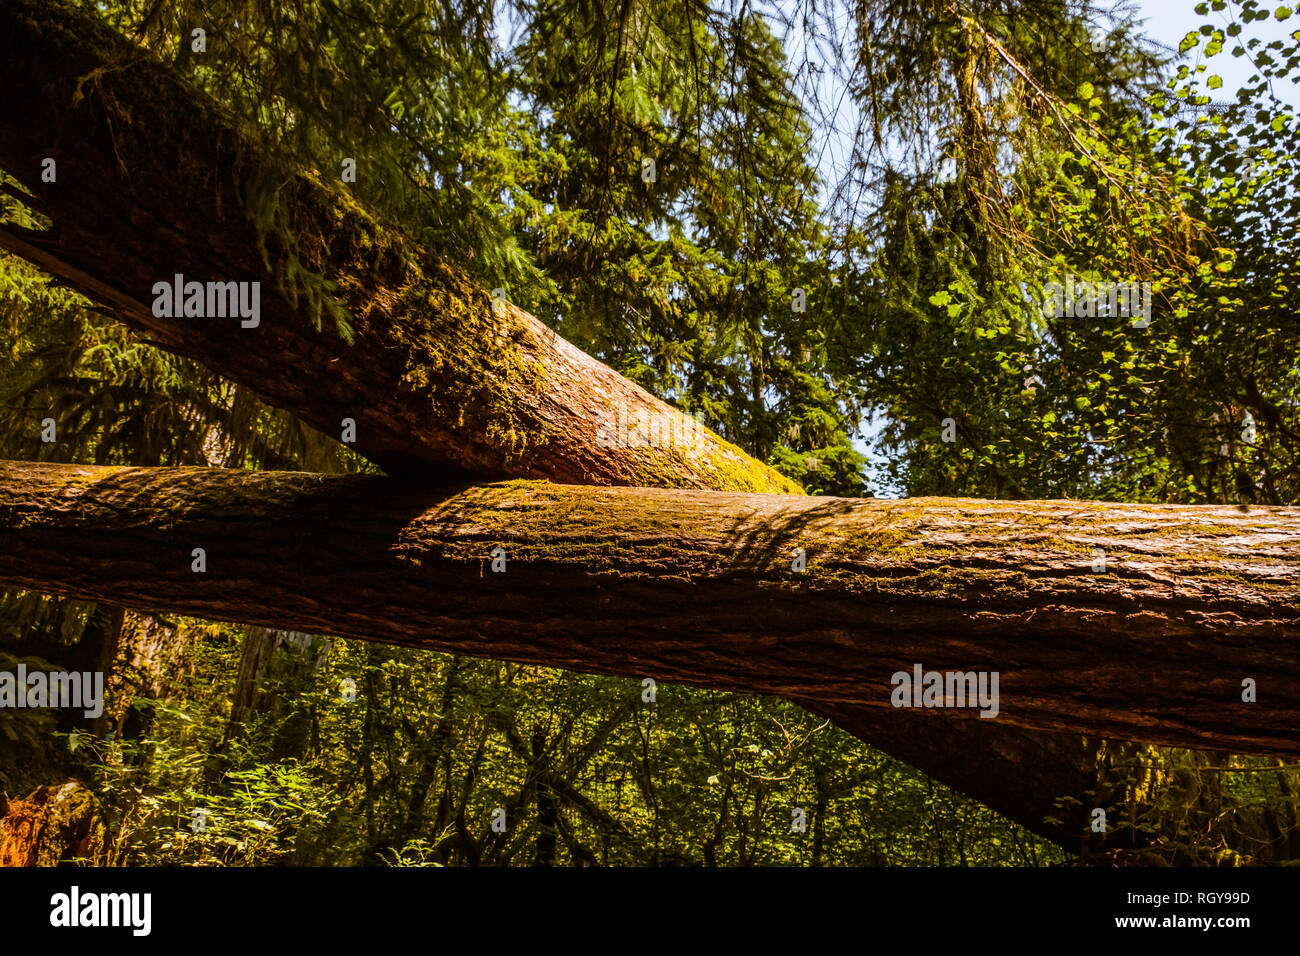 tree trunks crossing each other Stock Photo